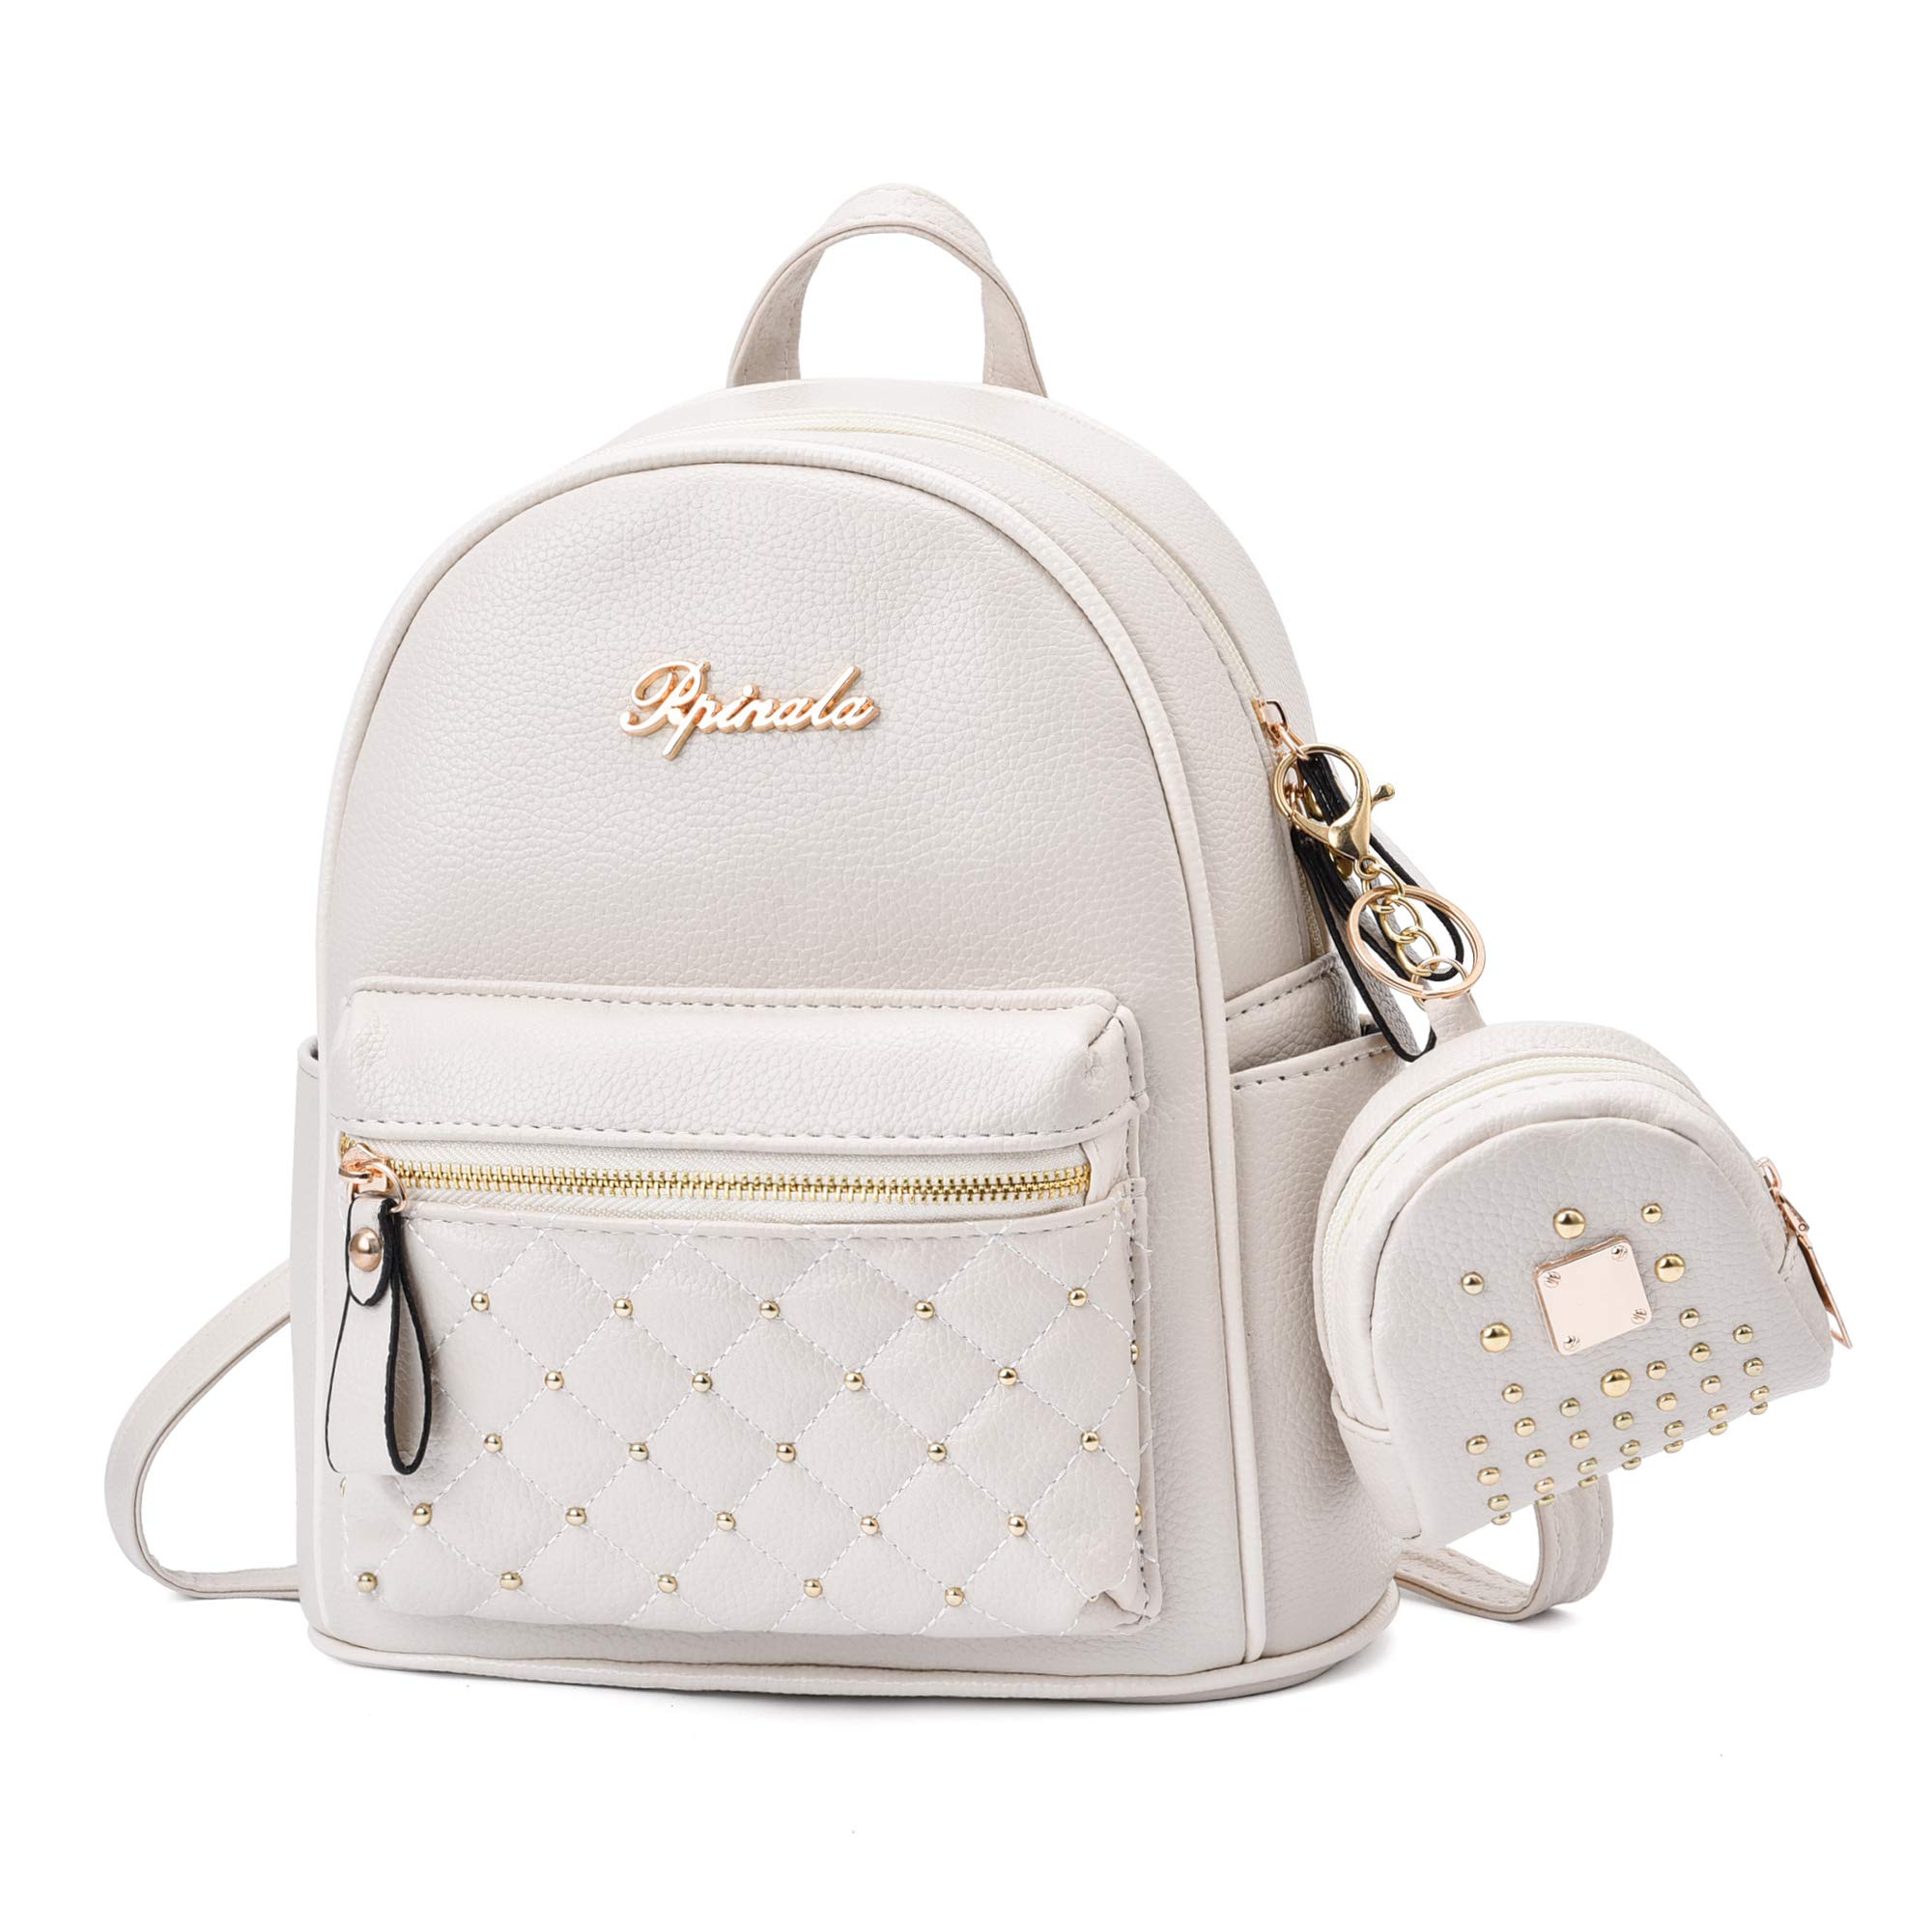 Cute Small Backpack Mini Purse Casual Daypacks Leather Review ...